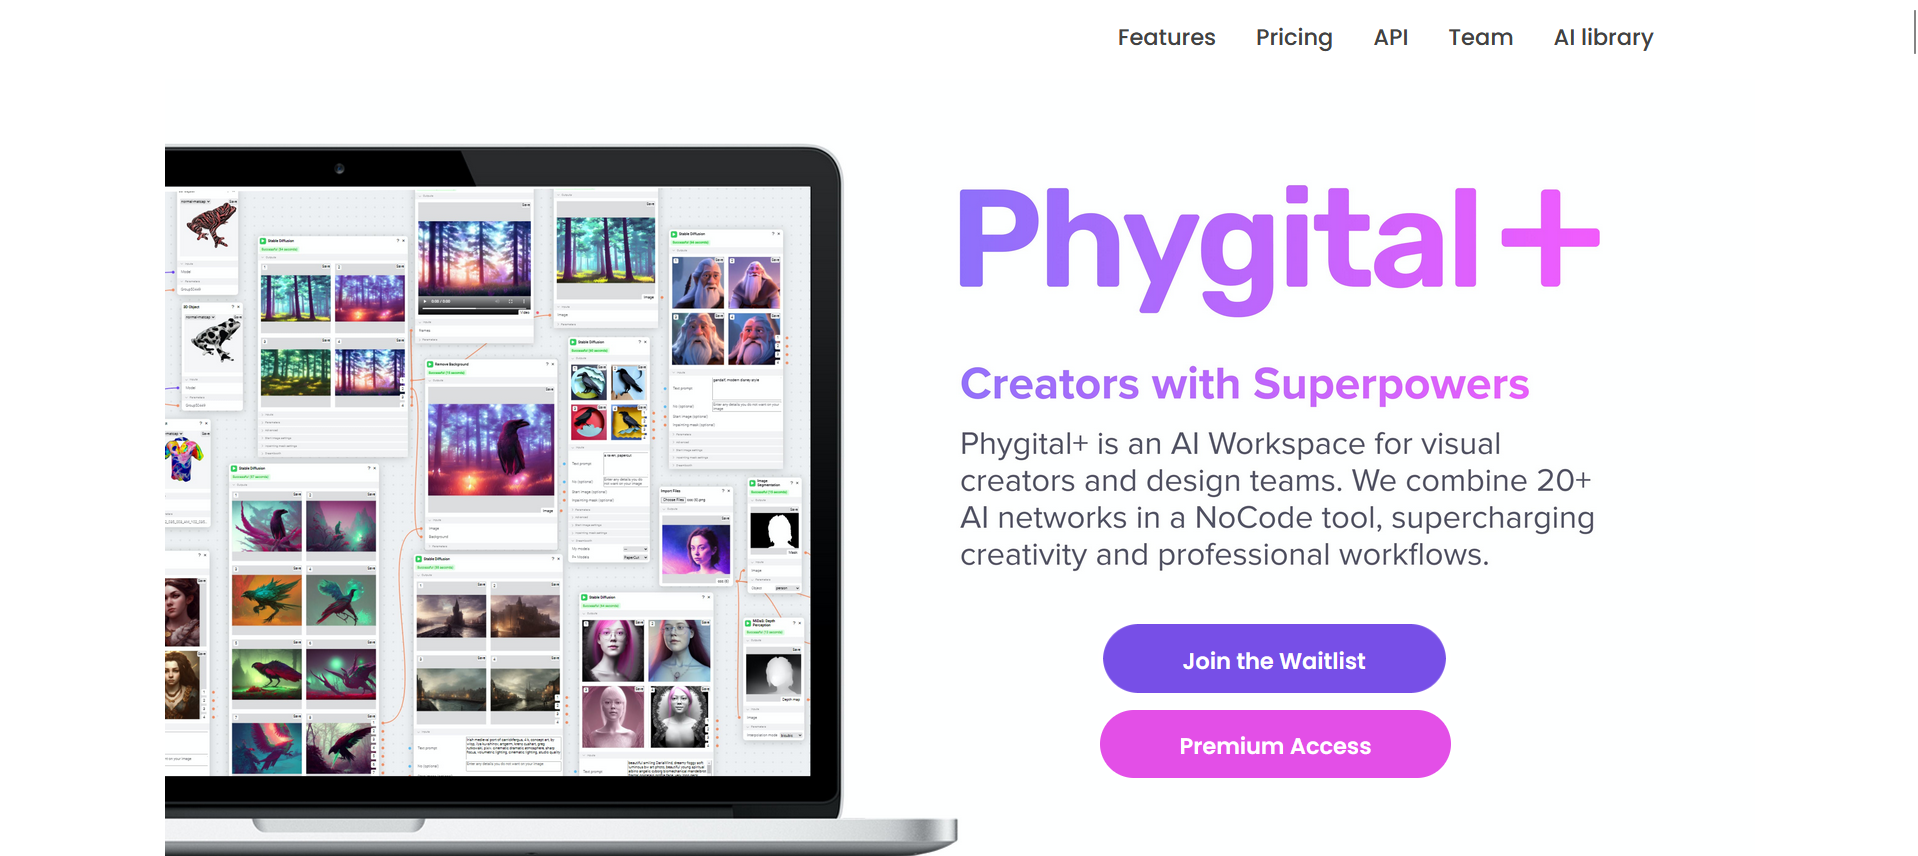 PhygitalAn AI powered workspace designed to empower and inspire visual creators